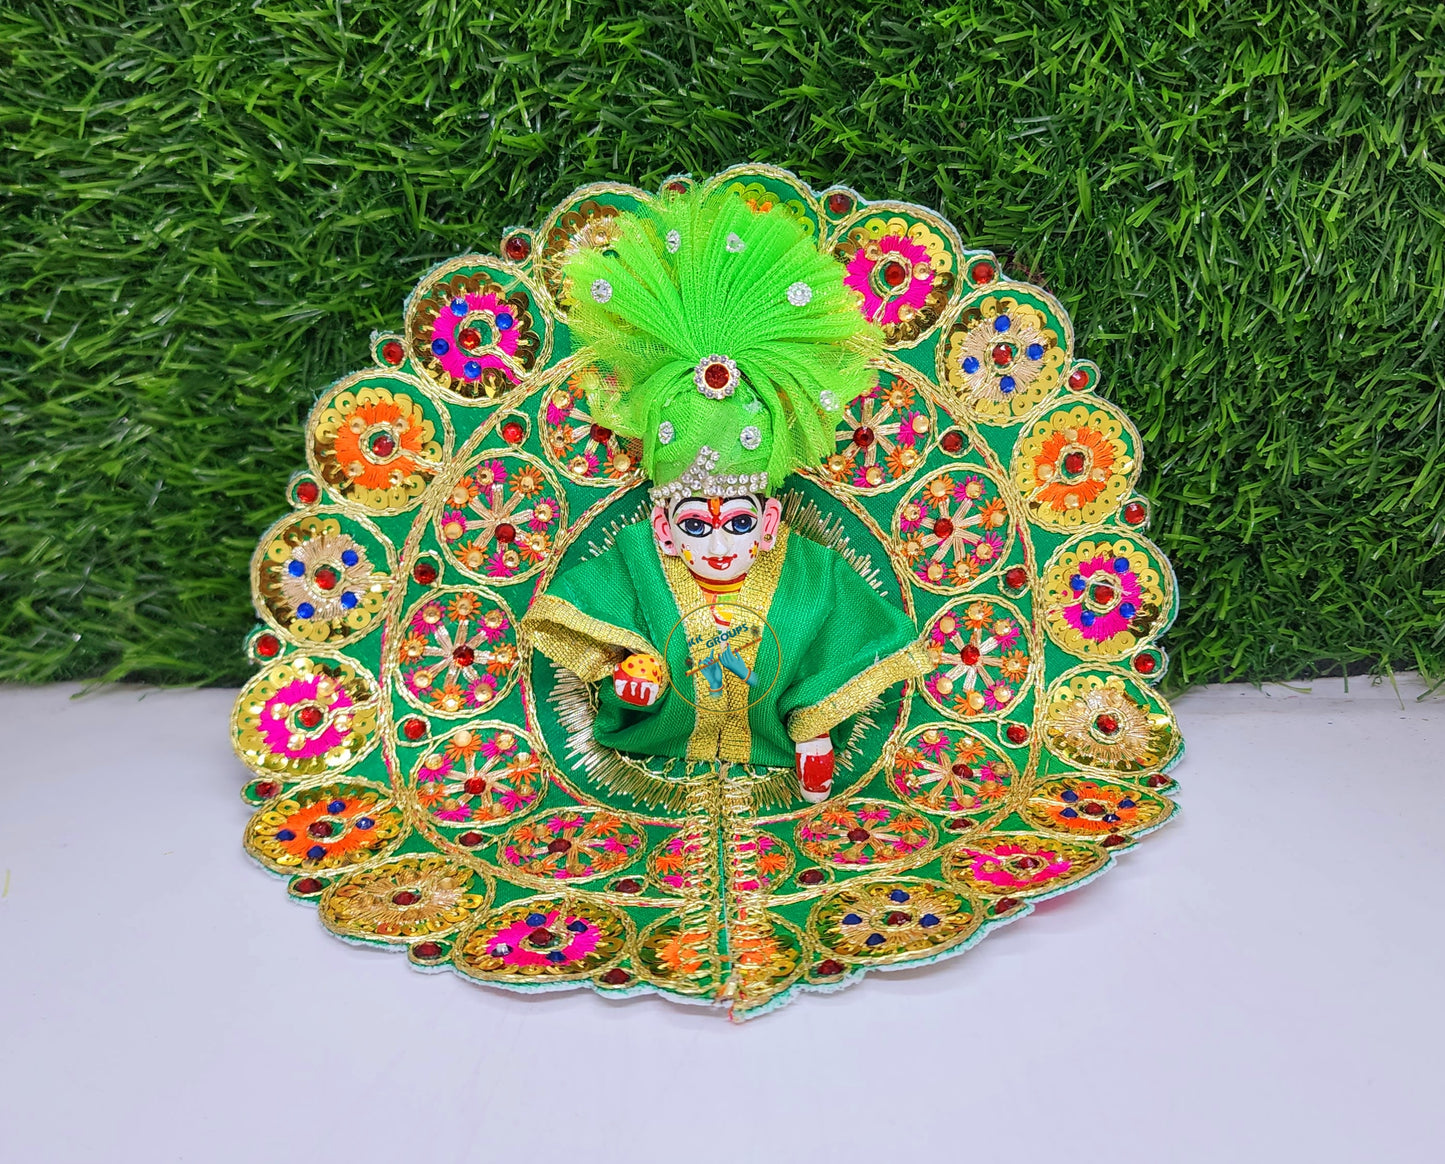 Green Embroidery Dress With Pagdi For Laddu Gopal ji